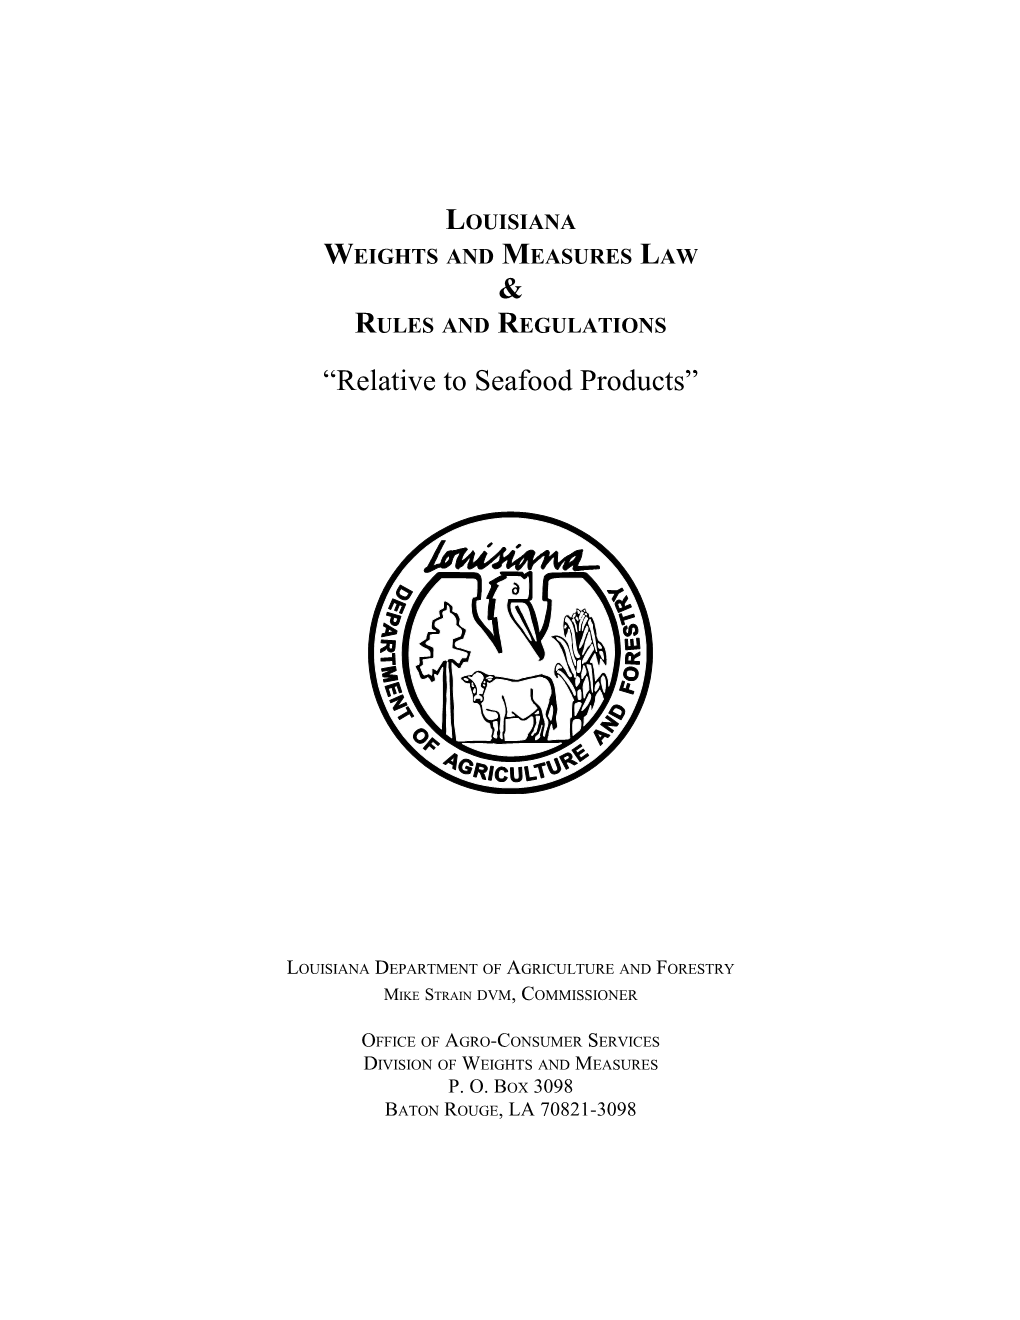 Weights and Measures Law